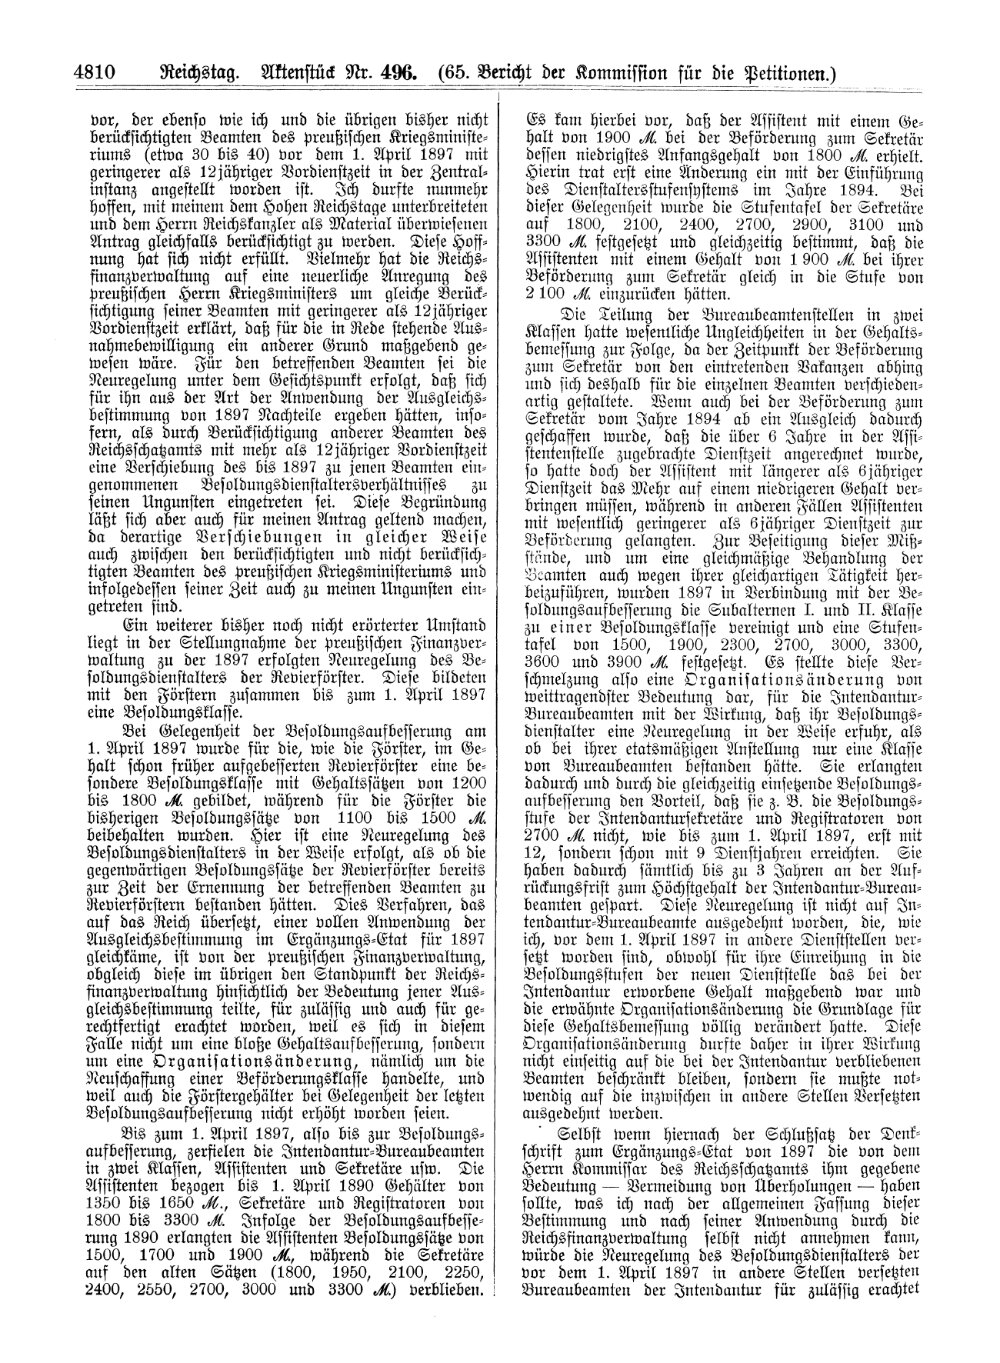 Scan of page 4810